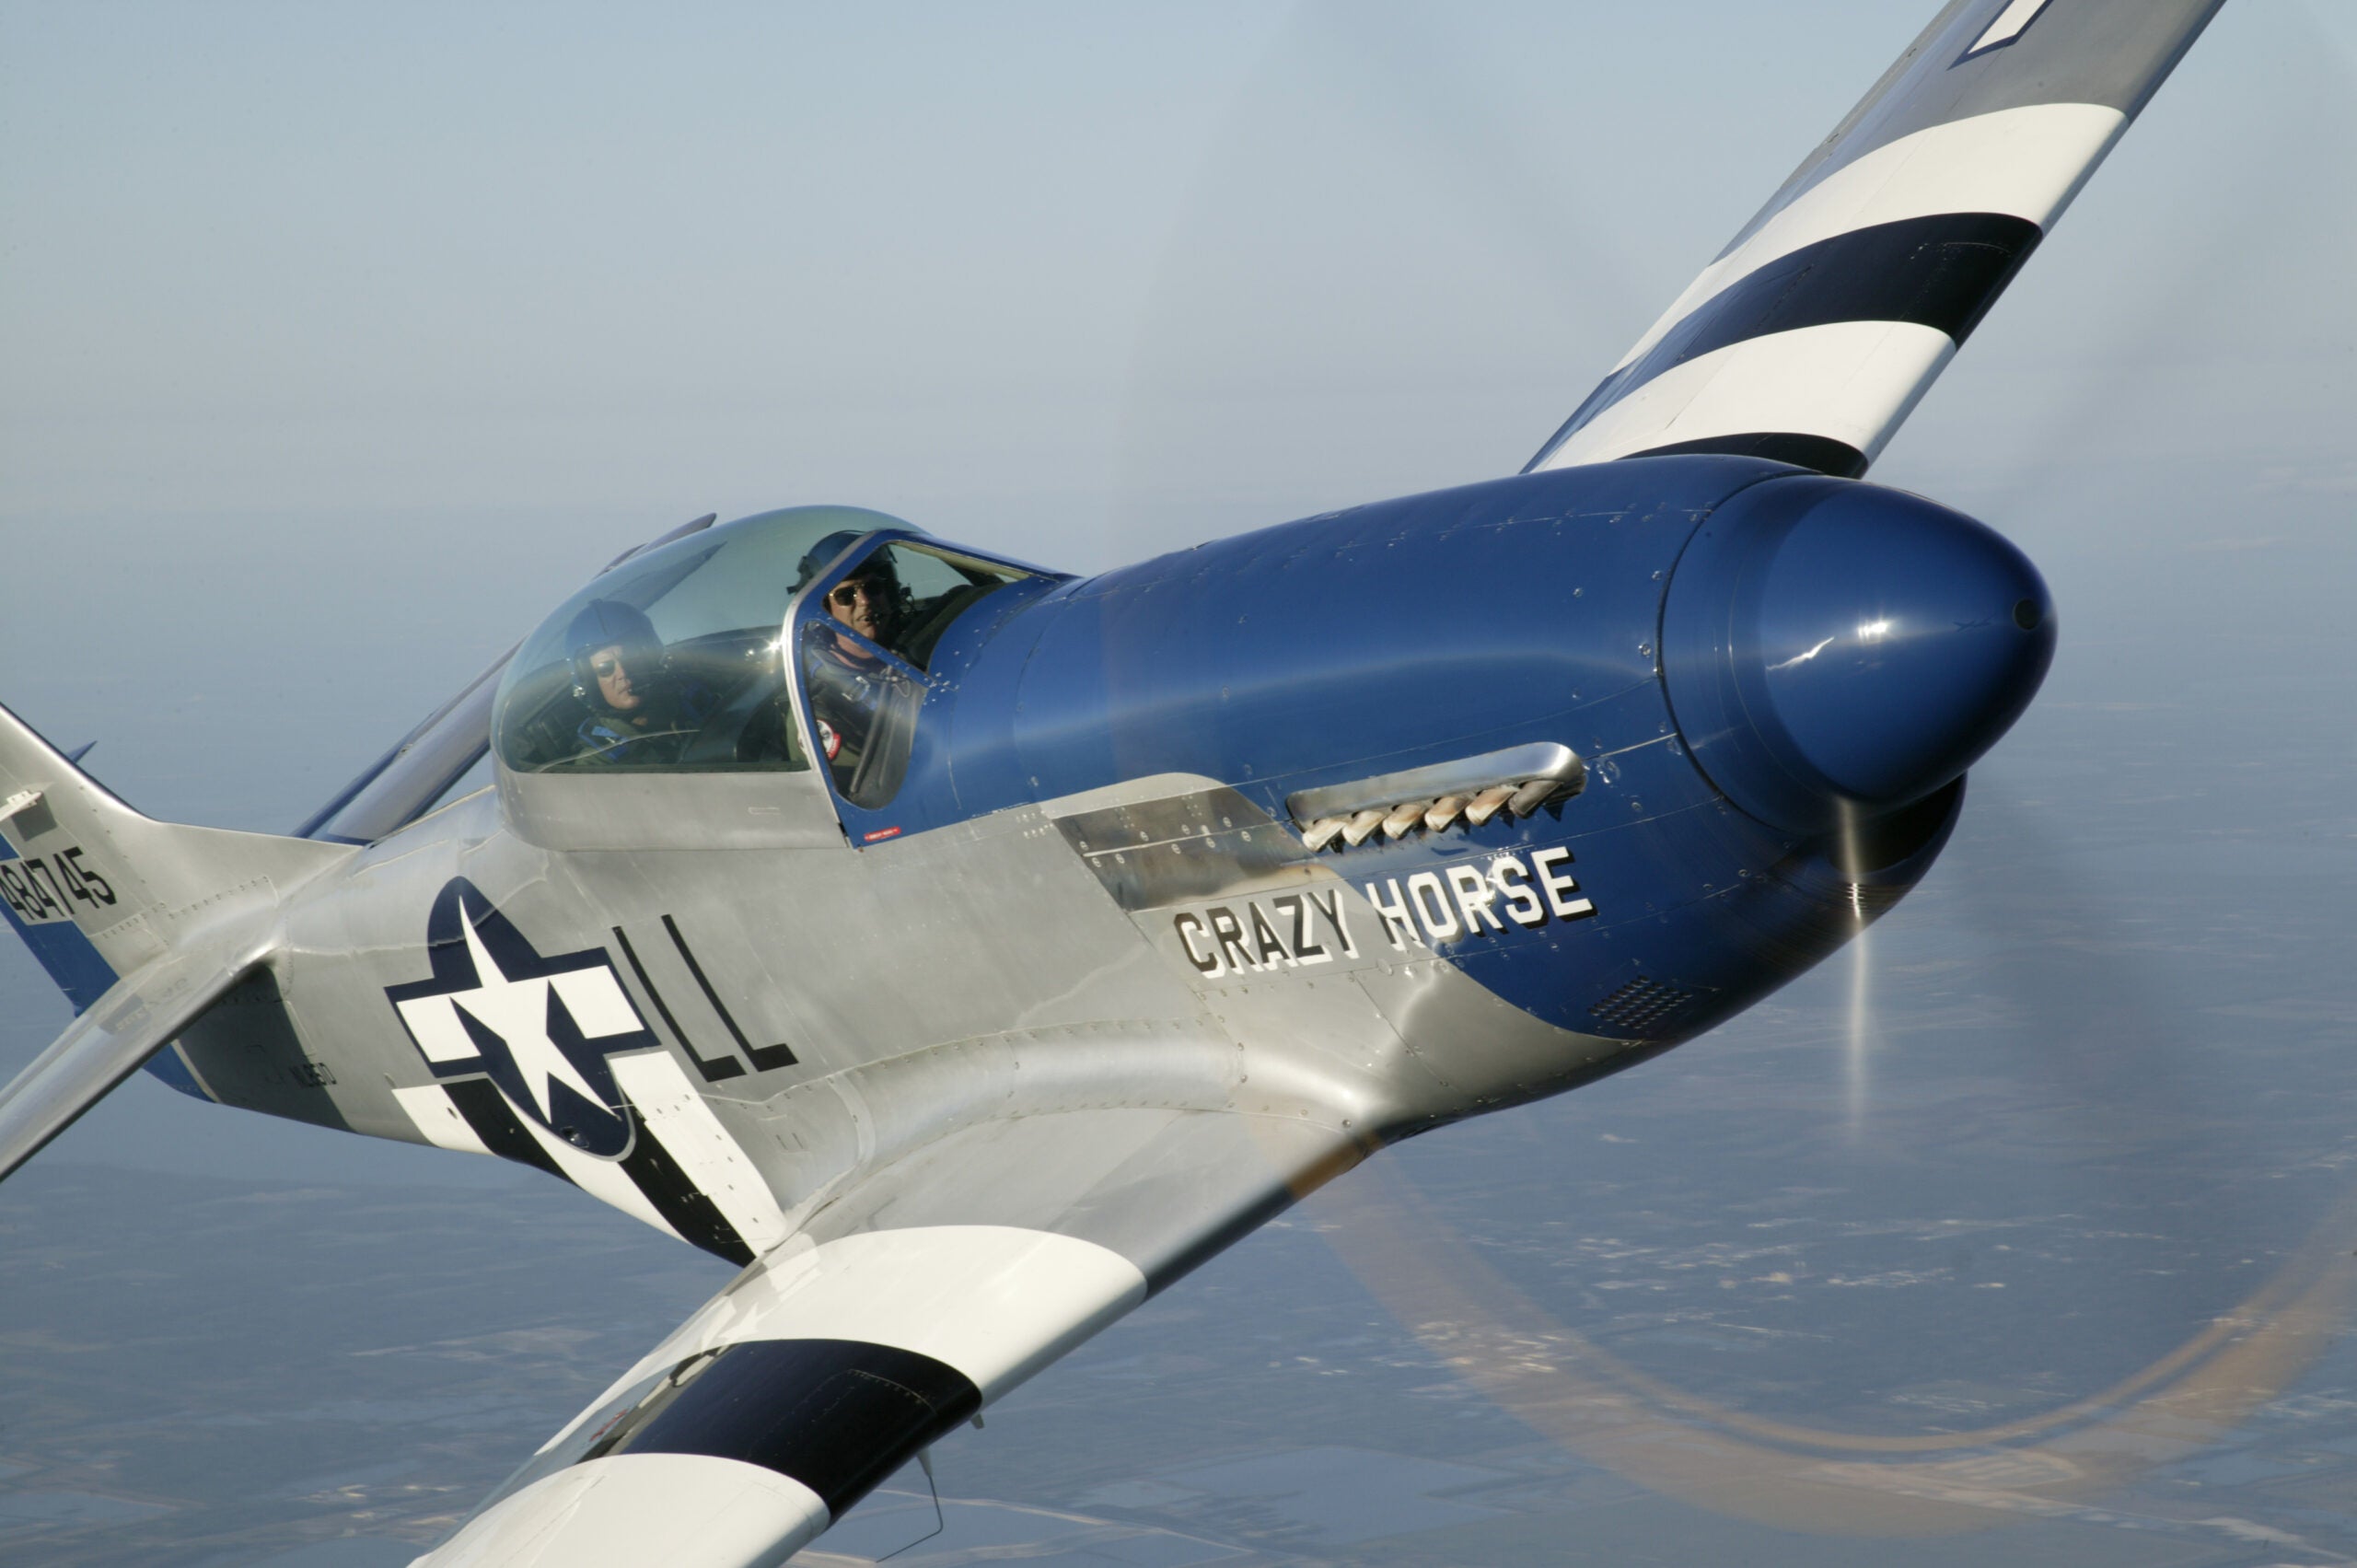 Fly a P-51 Mustang for $20?